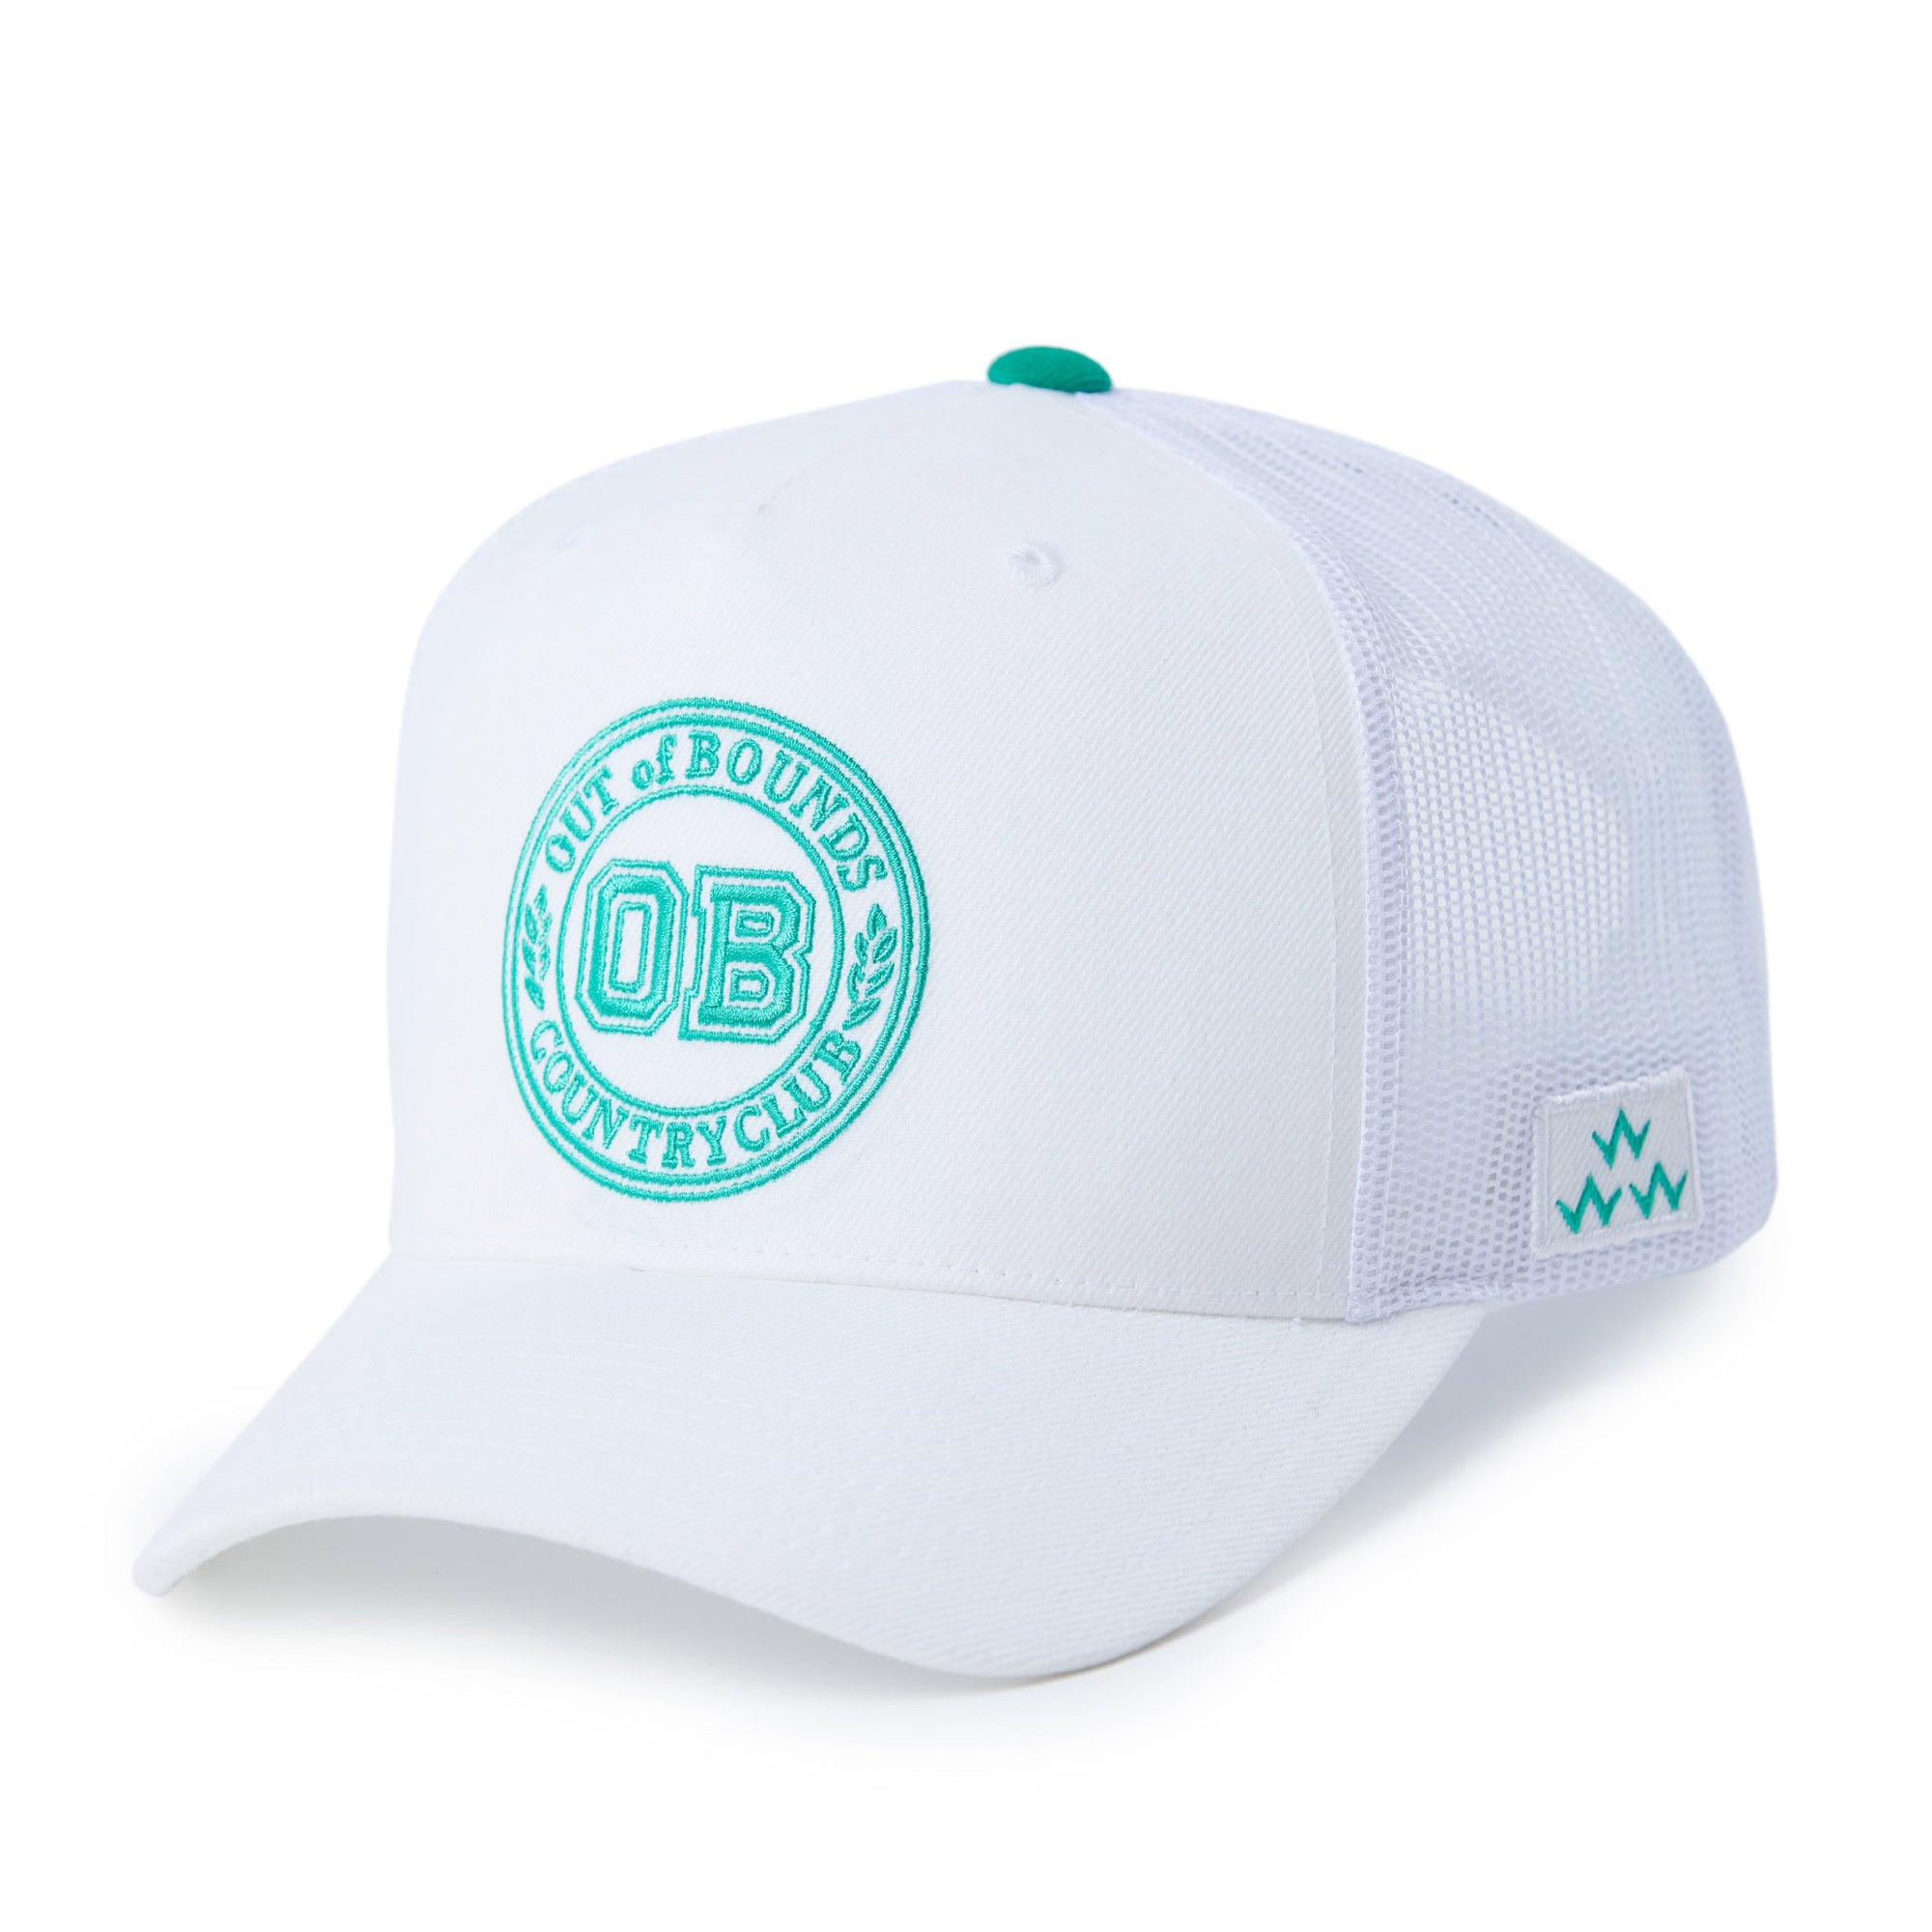 birds-of-condor-white-golf-out-of-bounds-country-club-snapback-a-frame-hat-front